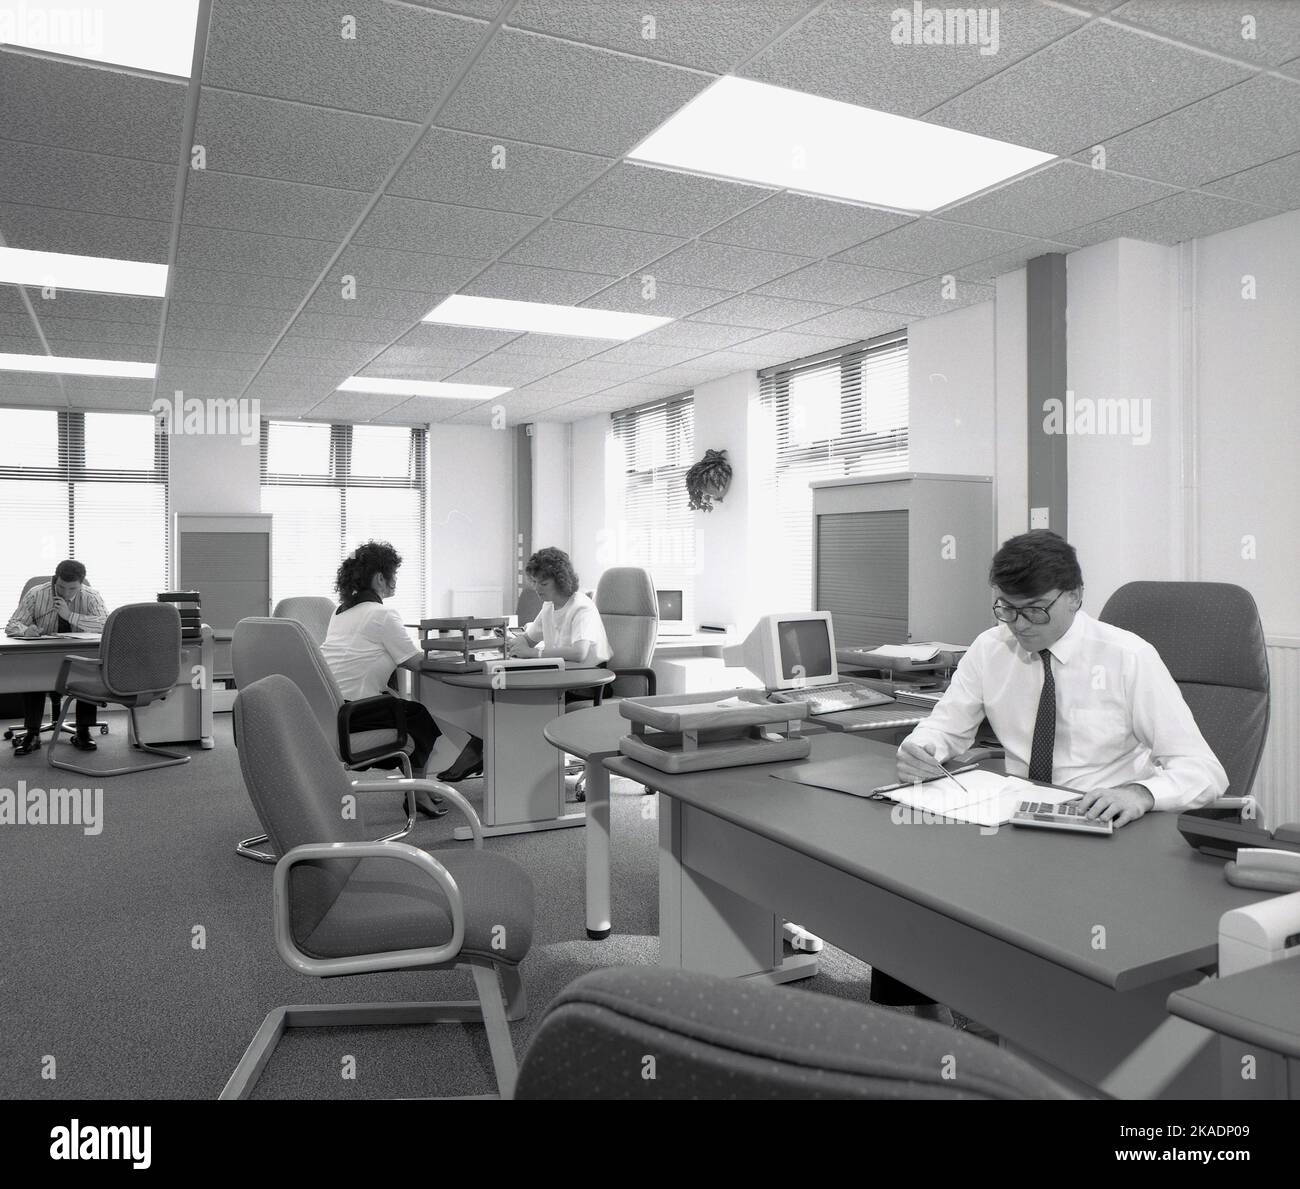 1989,  historical, people working in a large open-plan office, England, UK, Computer terminals of the era seen on the distance. Stock Photo